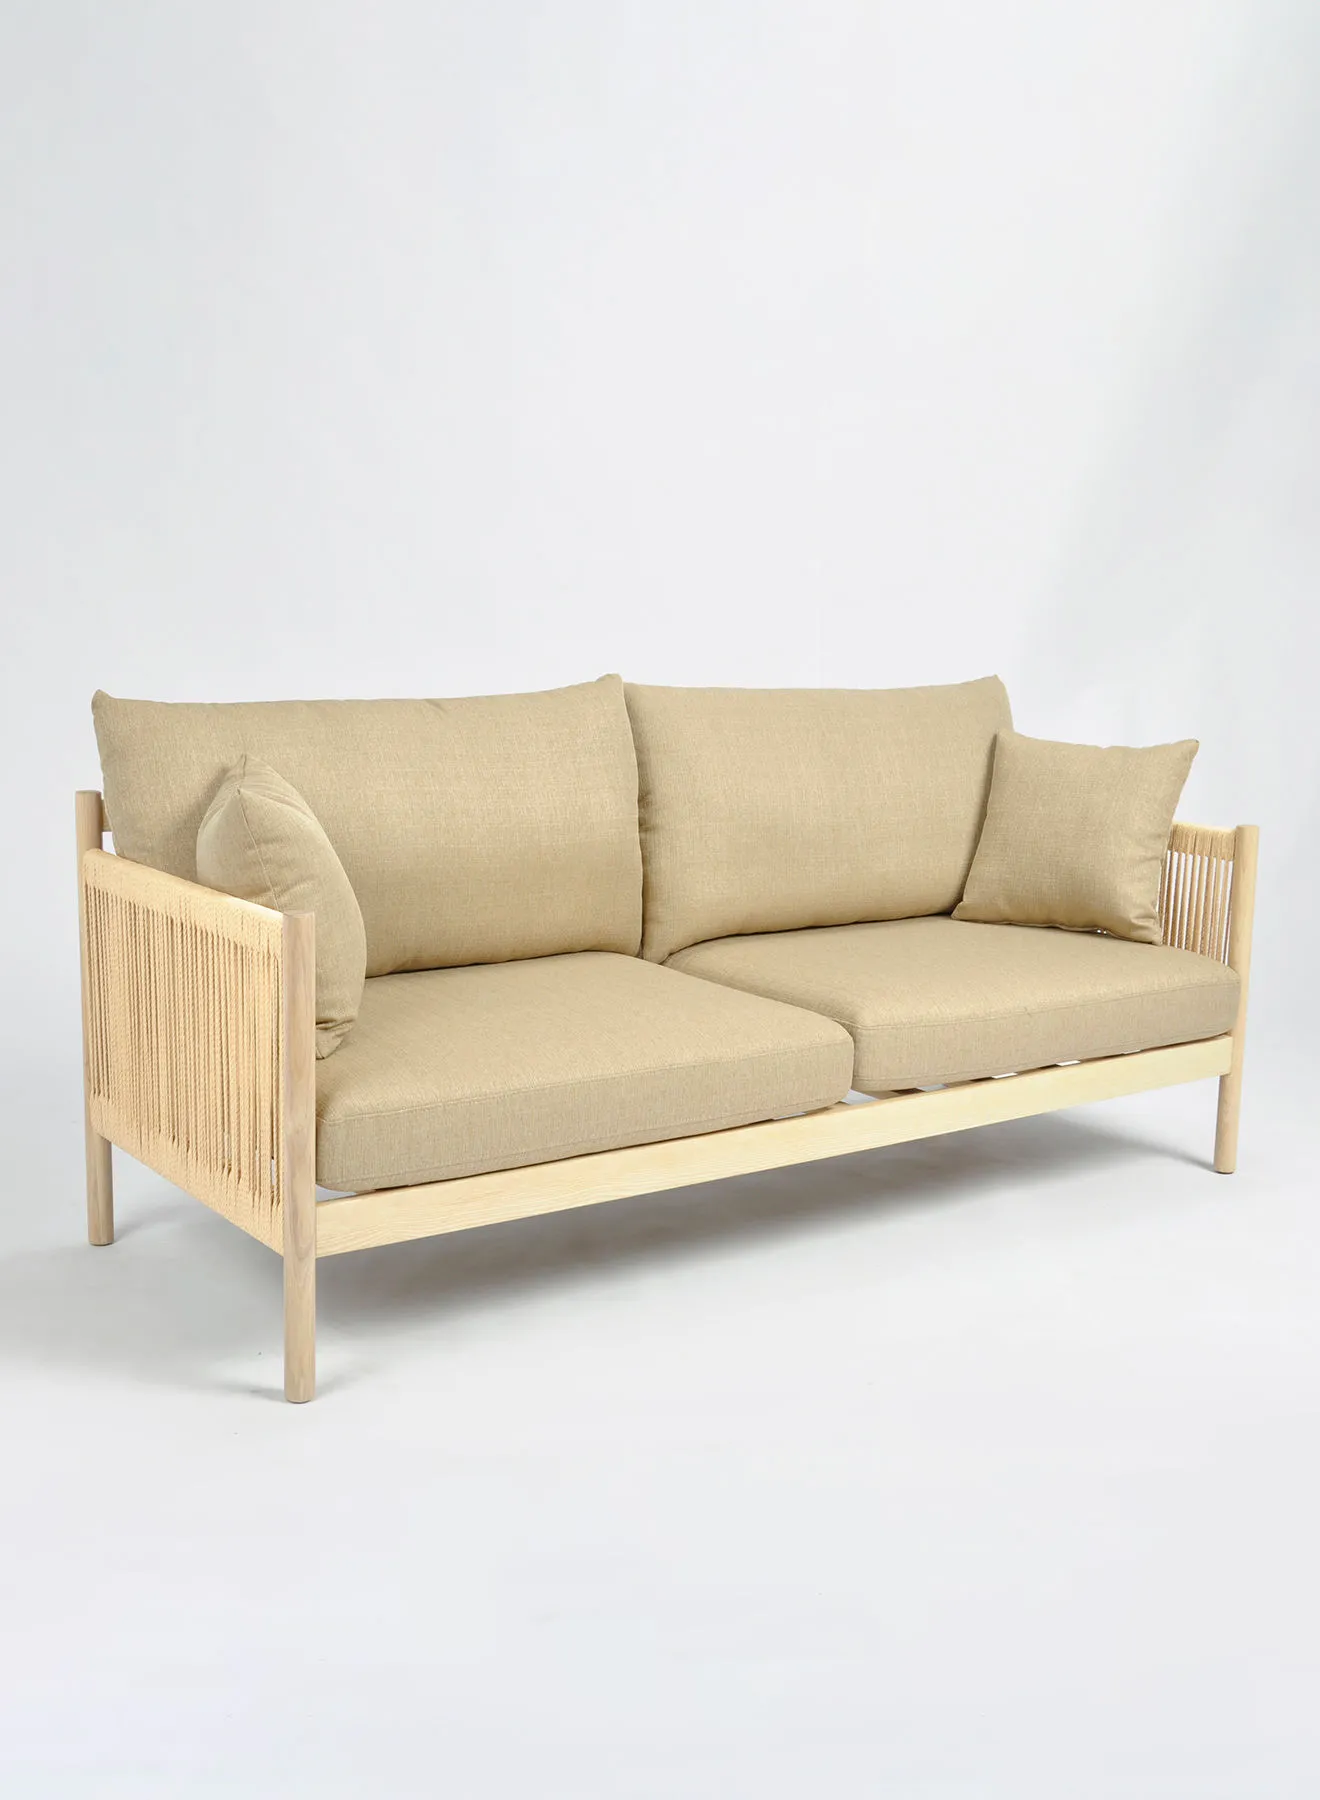 Switch Sofa - Beige Couch - 193 X 79 X 83 - 3 Seater Sofa Relaxing Sofa